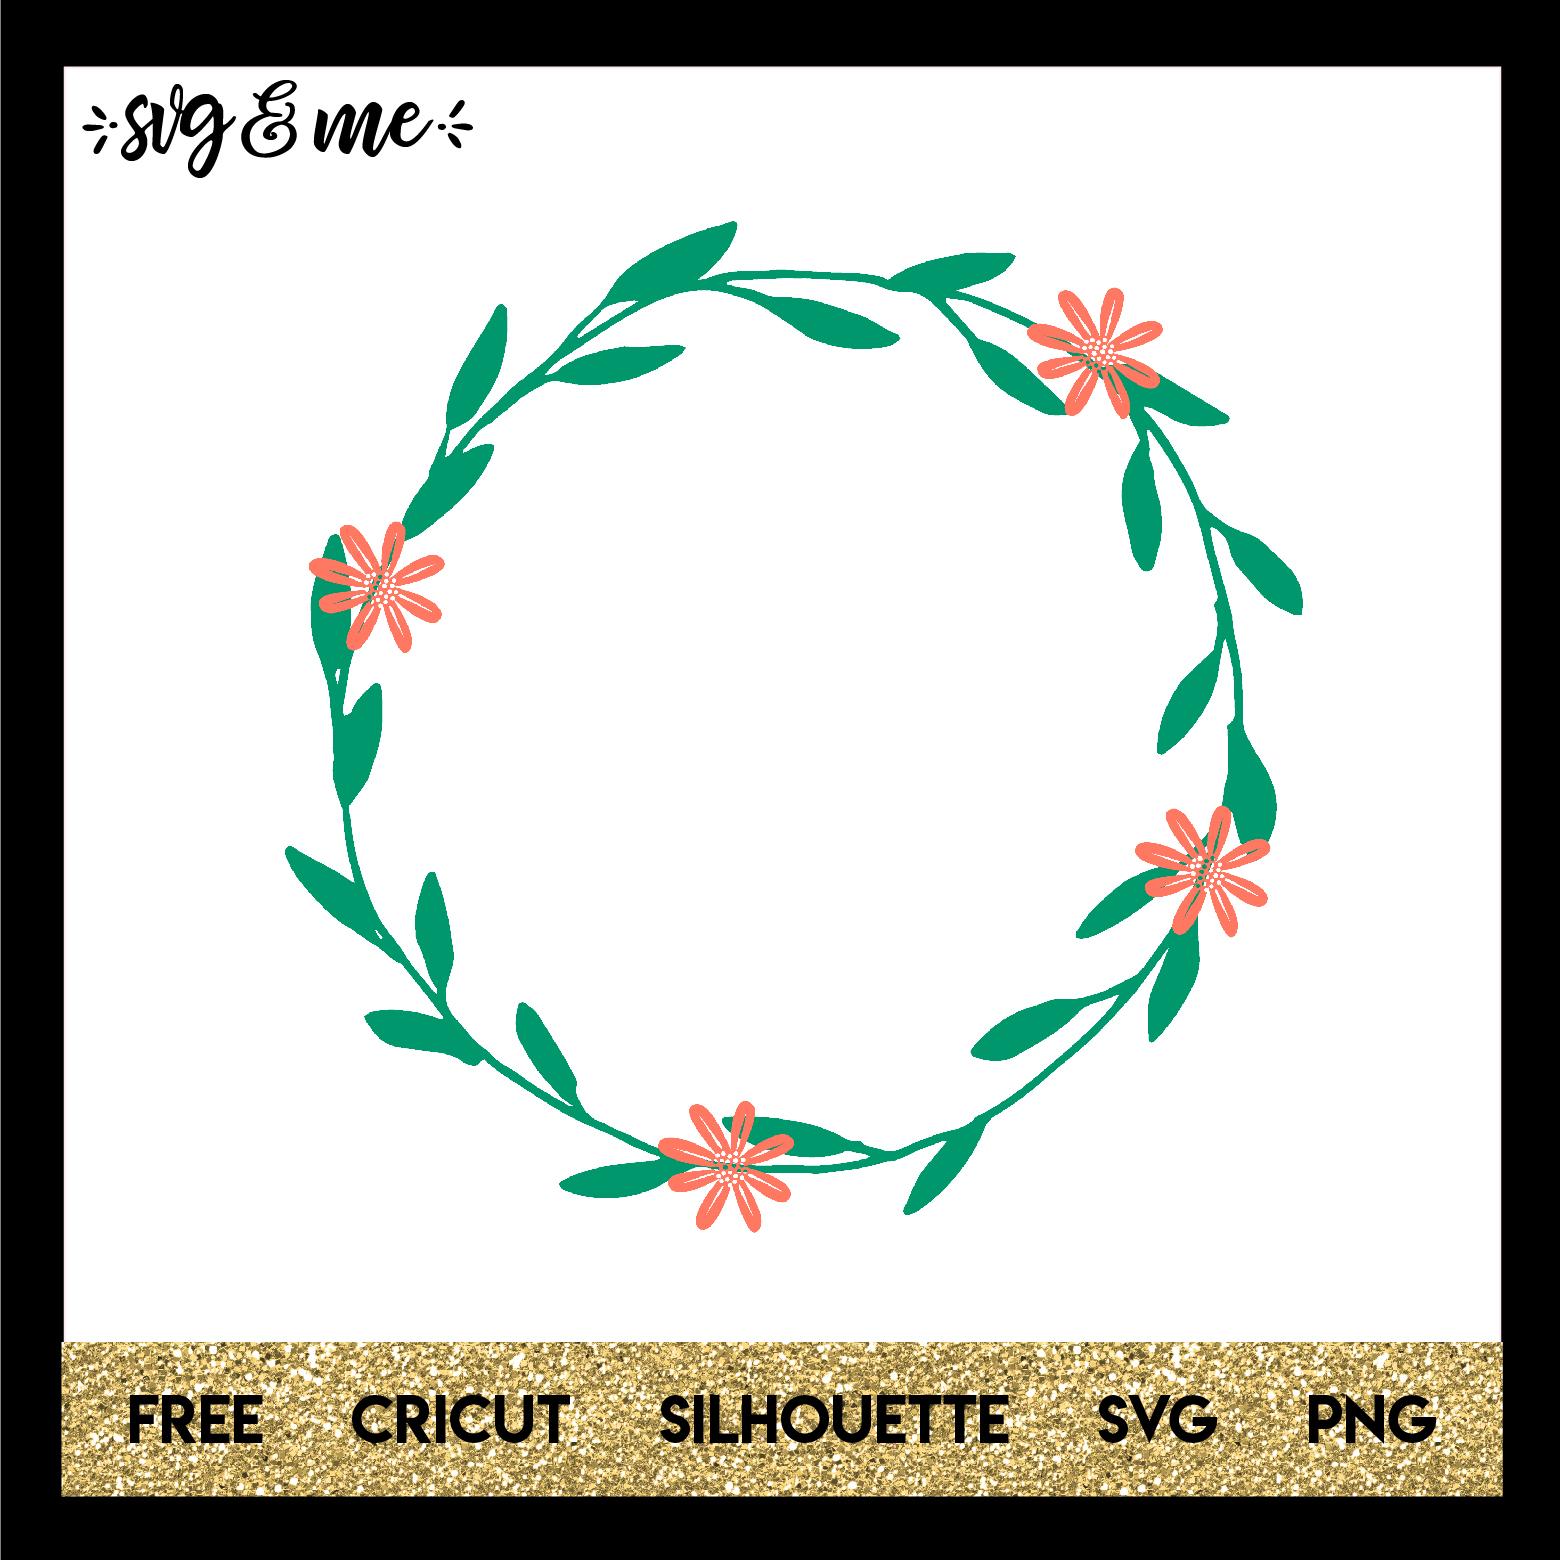 FREE SVG CUT FILE for Cricut, Silhouette and more - Laurel Flower Wreath Frame Free SVG